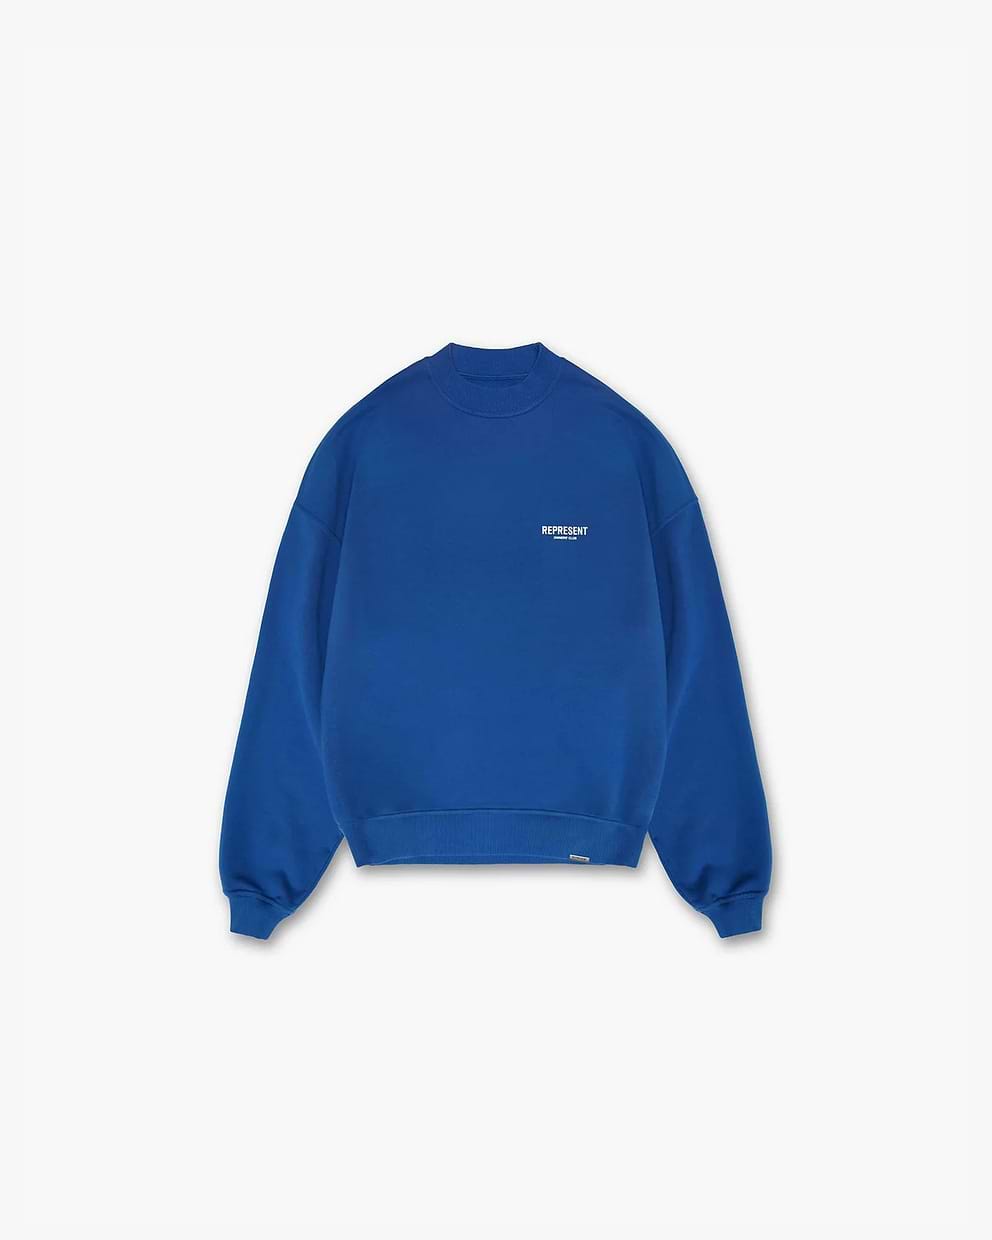 Represent Owners Club Sweater - Cobalt